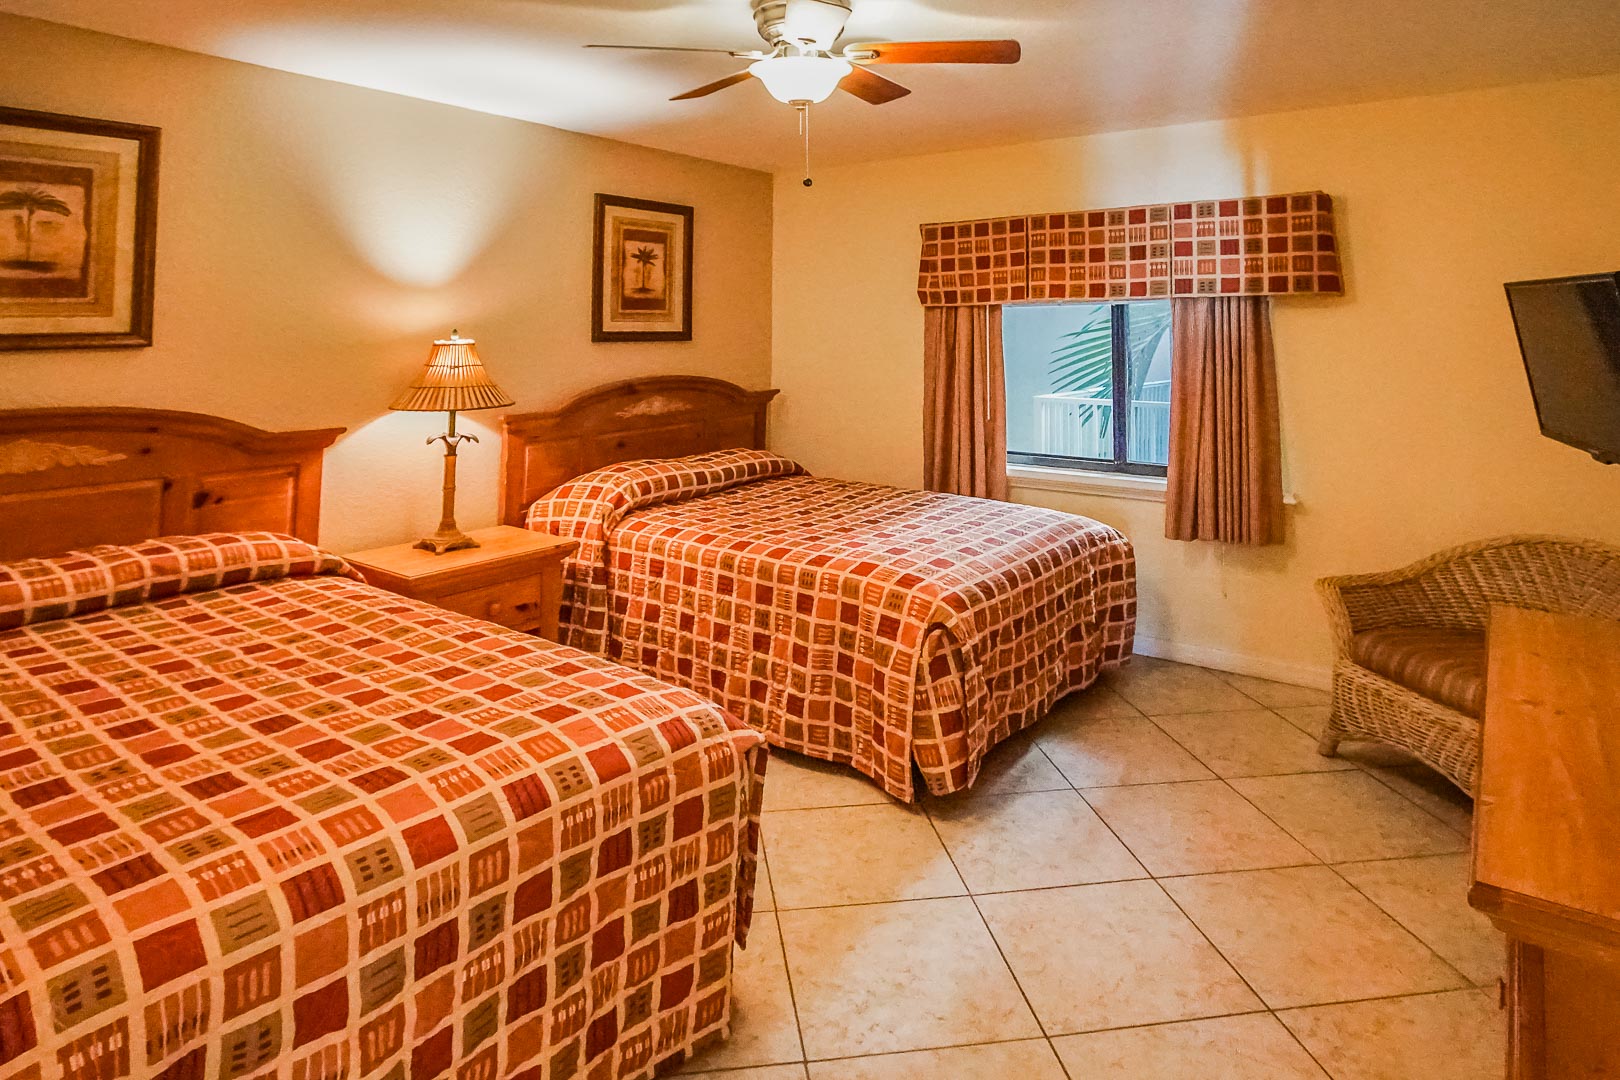 A bedroom with double beds at VRI's Sand Pebble Resort in Treasure Island, Florida.